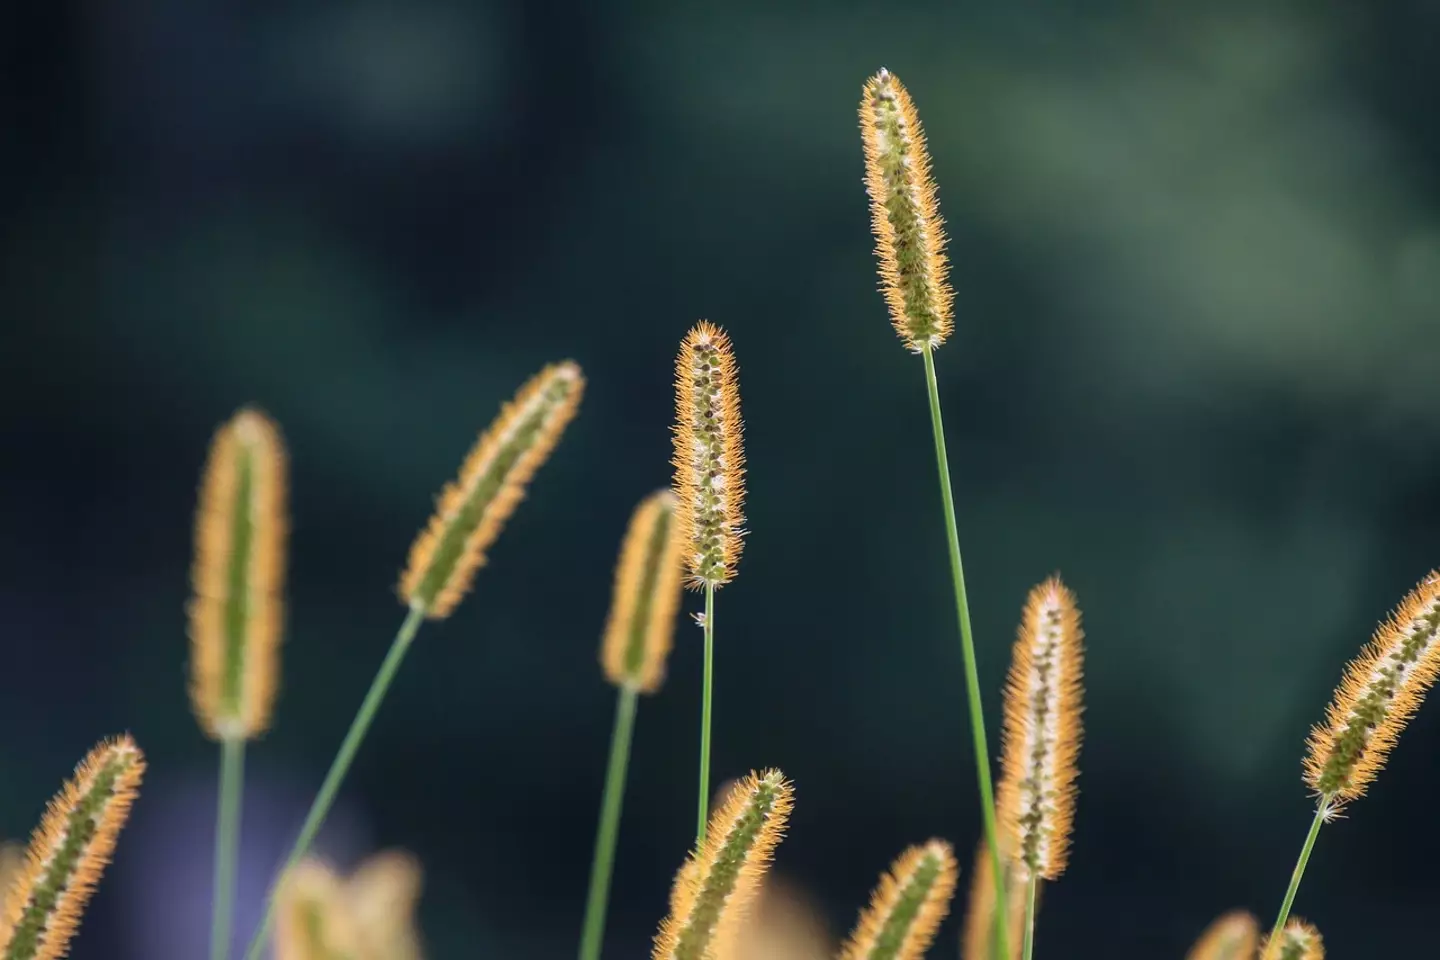 Foxtail plants can be dangerous to dogs and other pets.